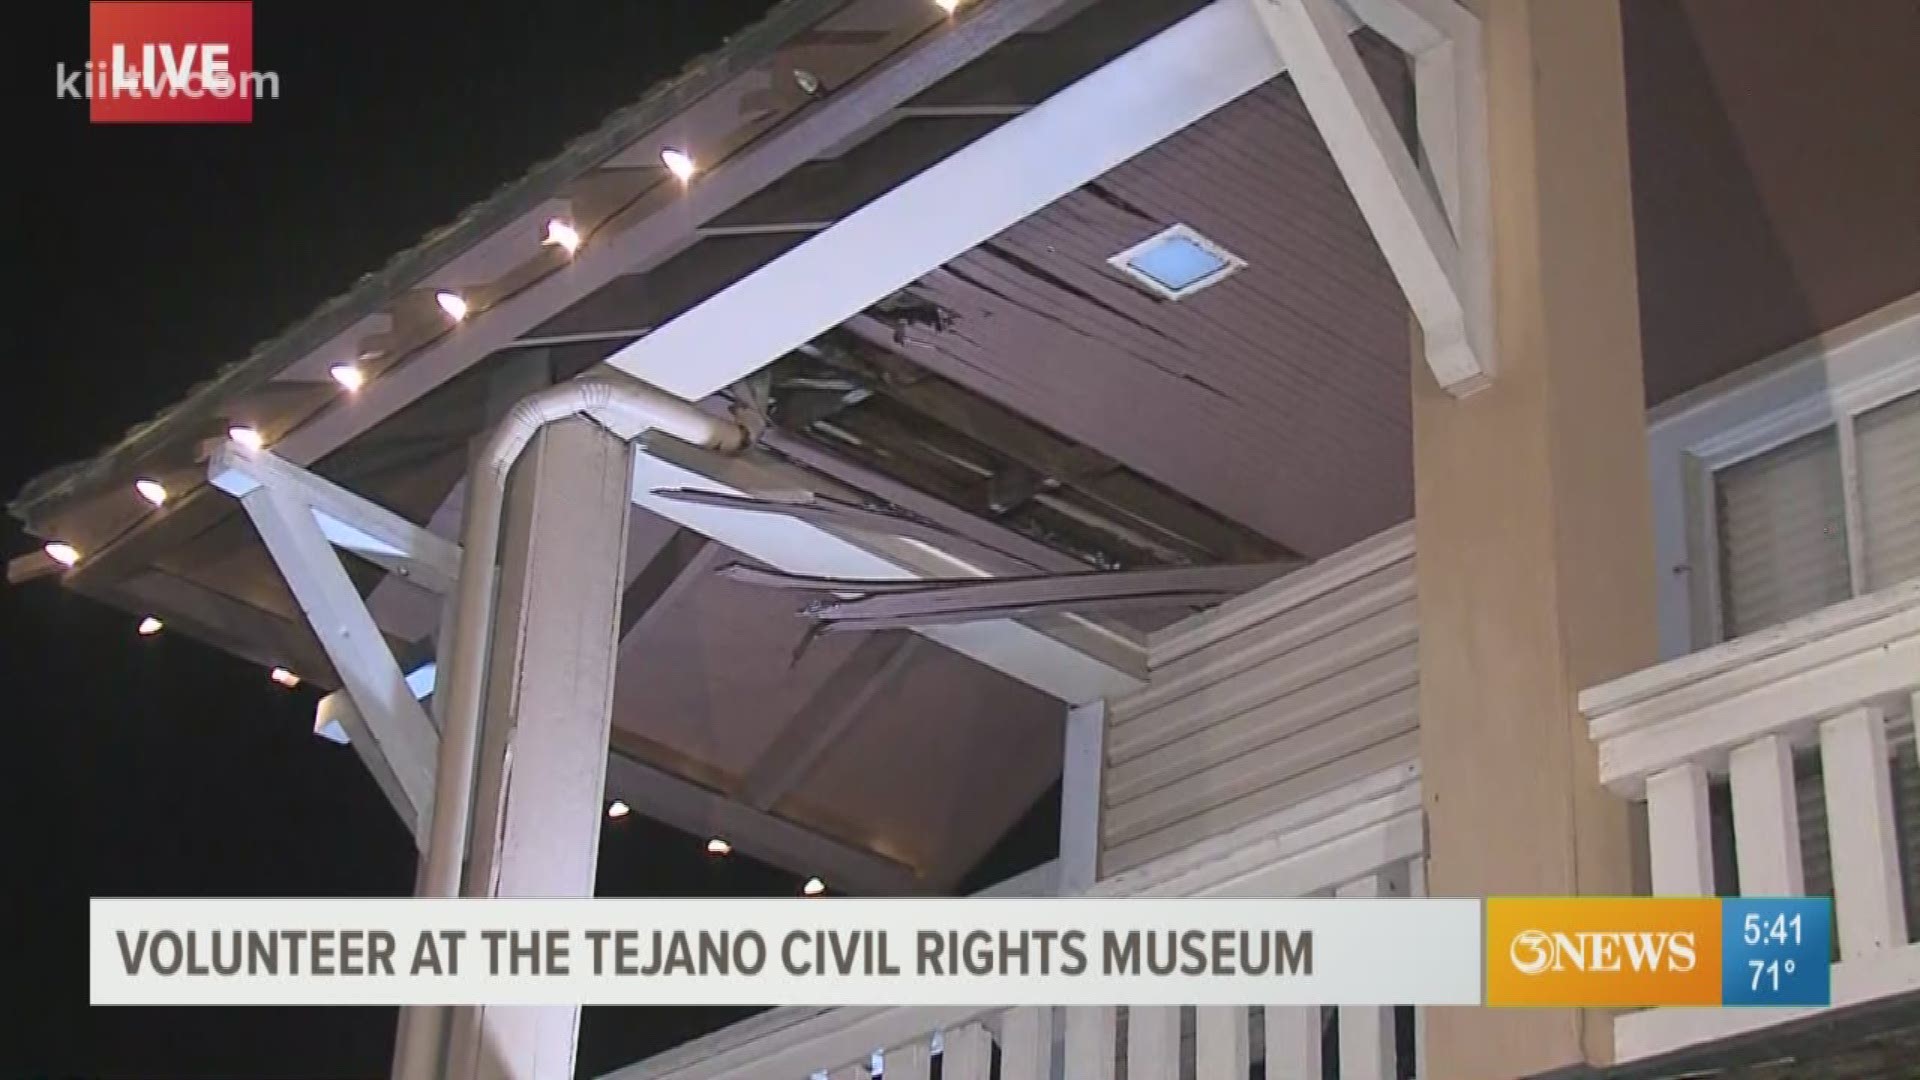 The Tejano Civil Rights Museum is asking for the community to help keep the doors open.